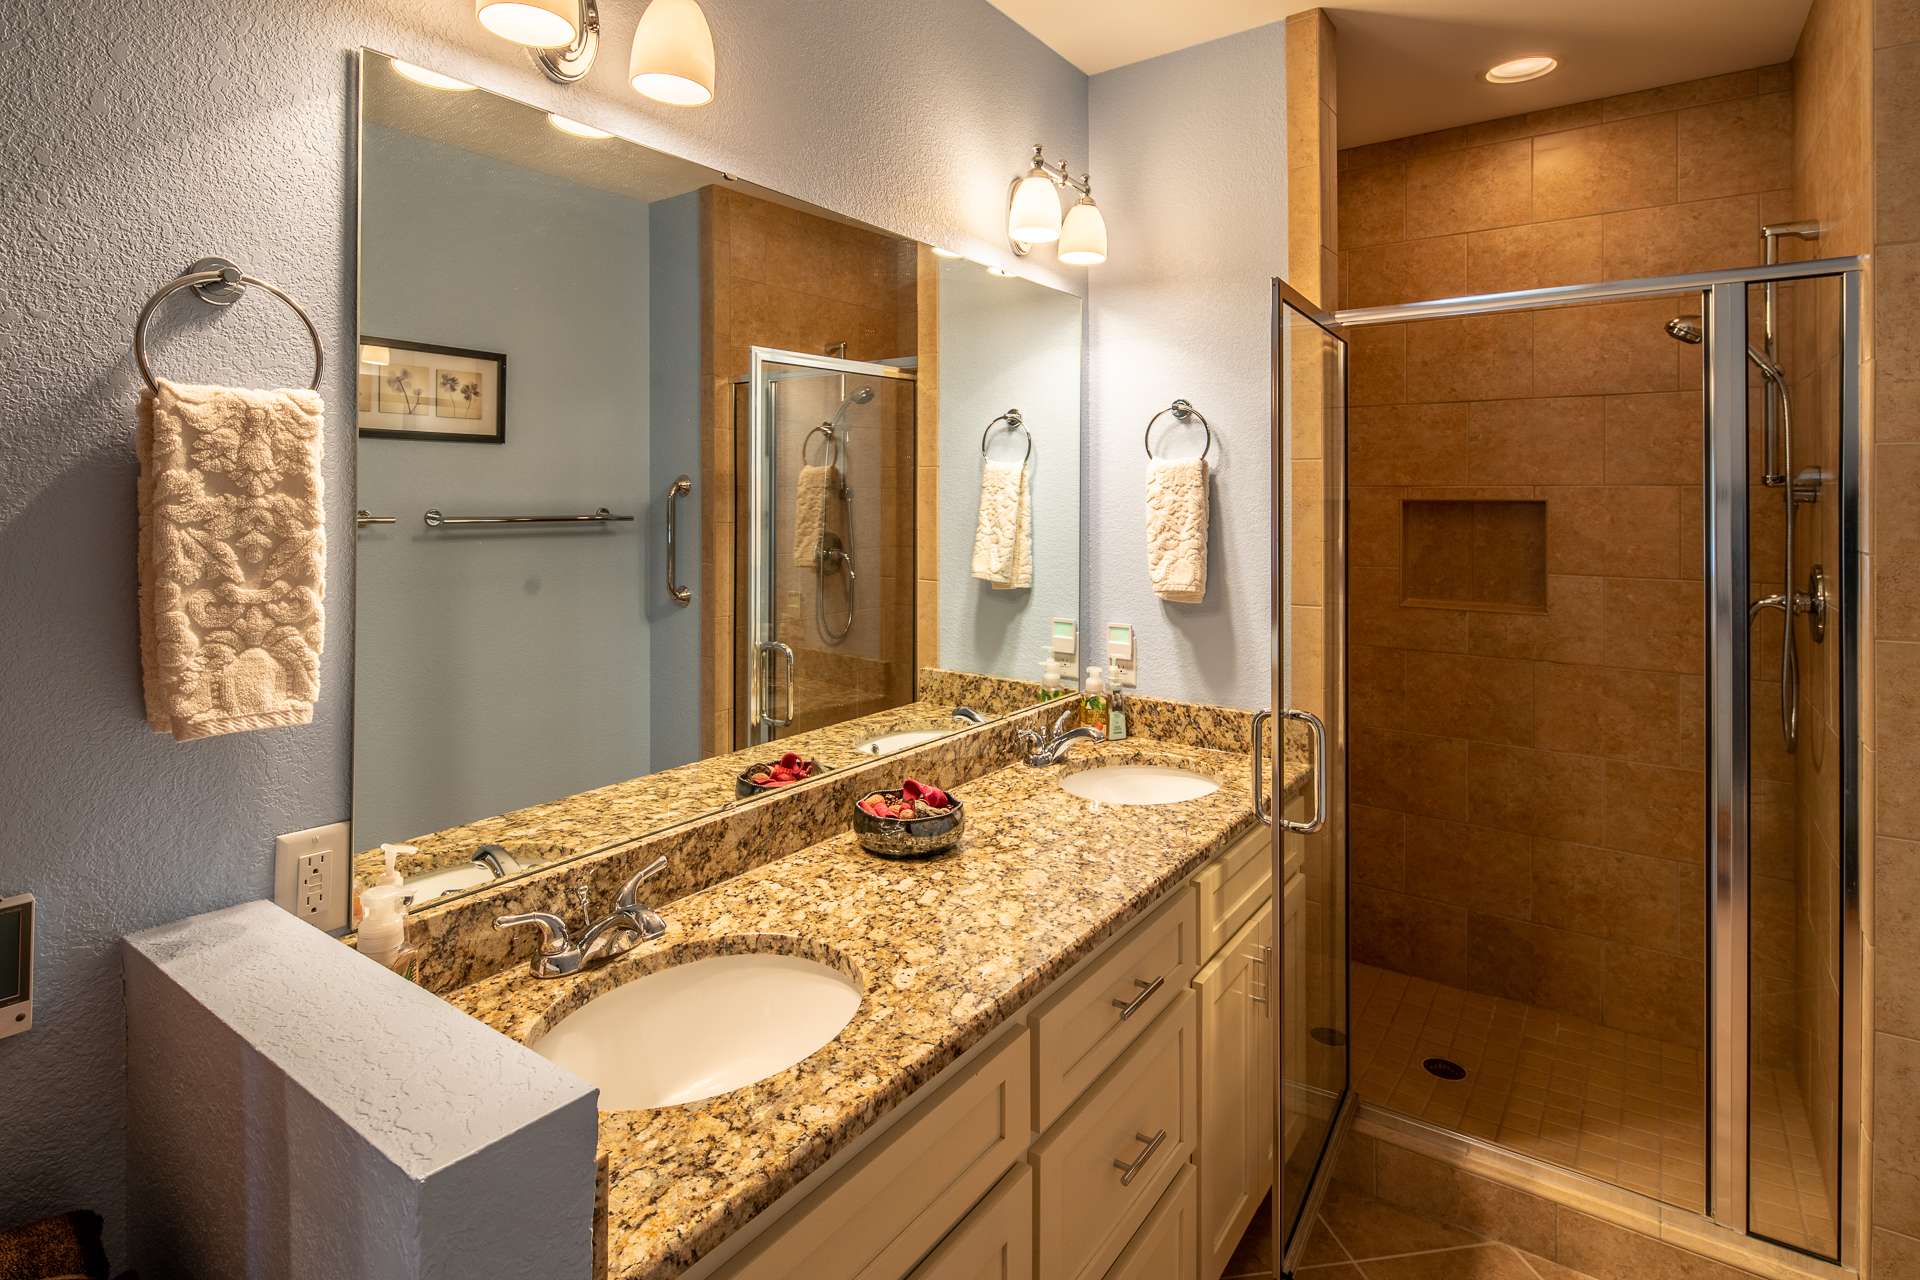 Private bath features double vanity, granite counter top, walk-in tile shower and heated tile floor.